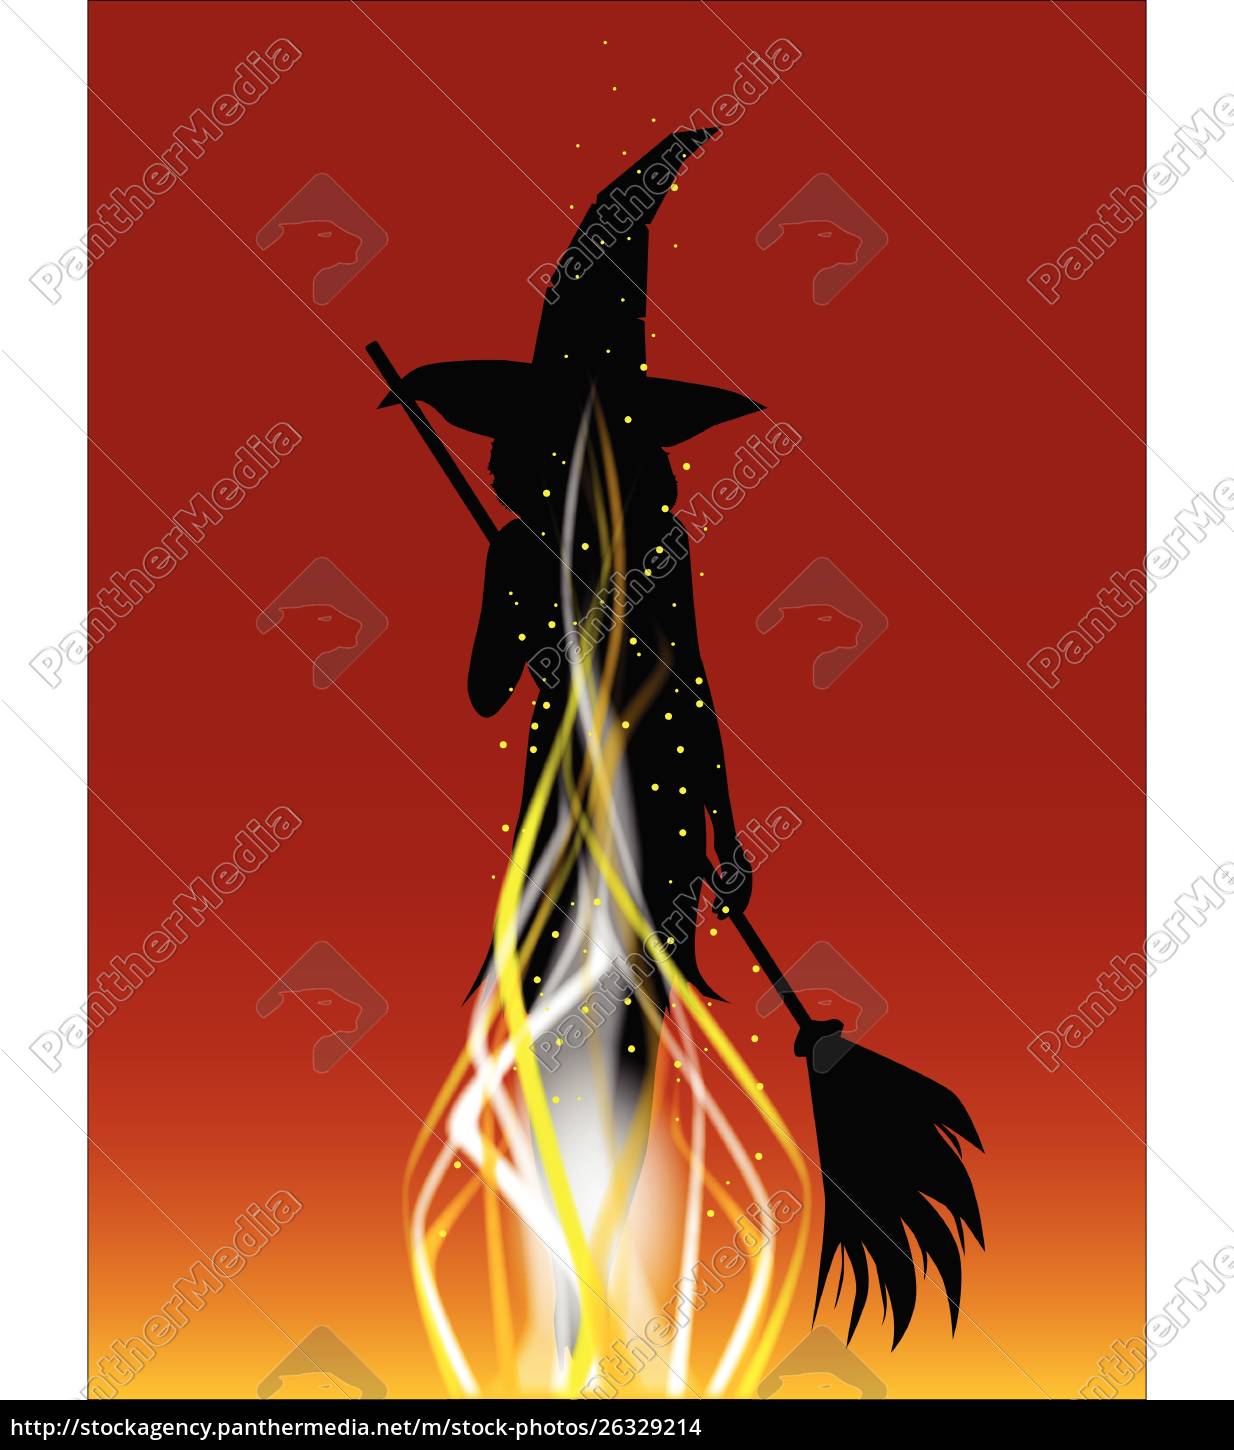 Agency　Witch　Stock　image　#26329214　PantherMedia　Stock　Burning　The